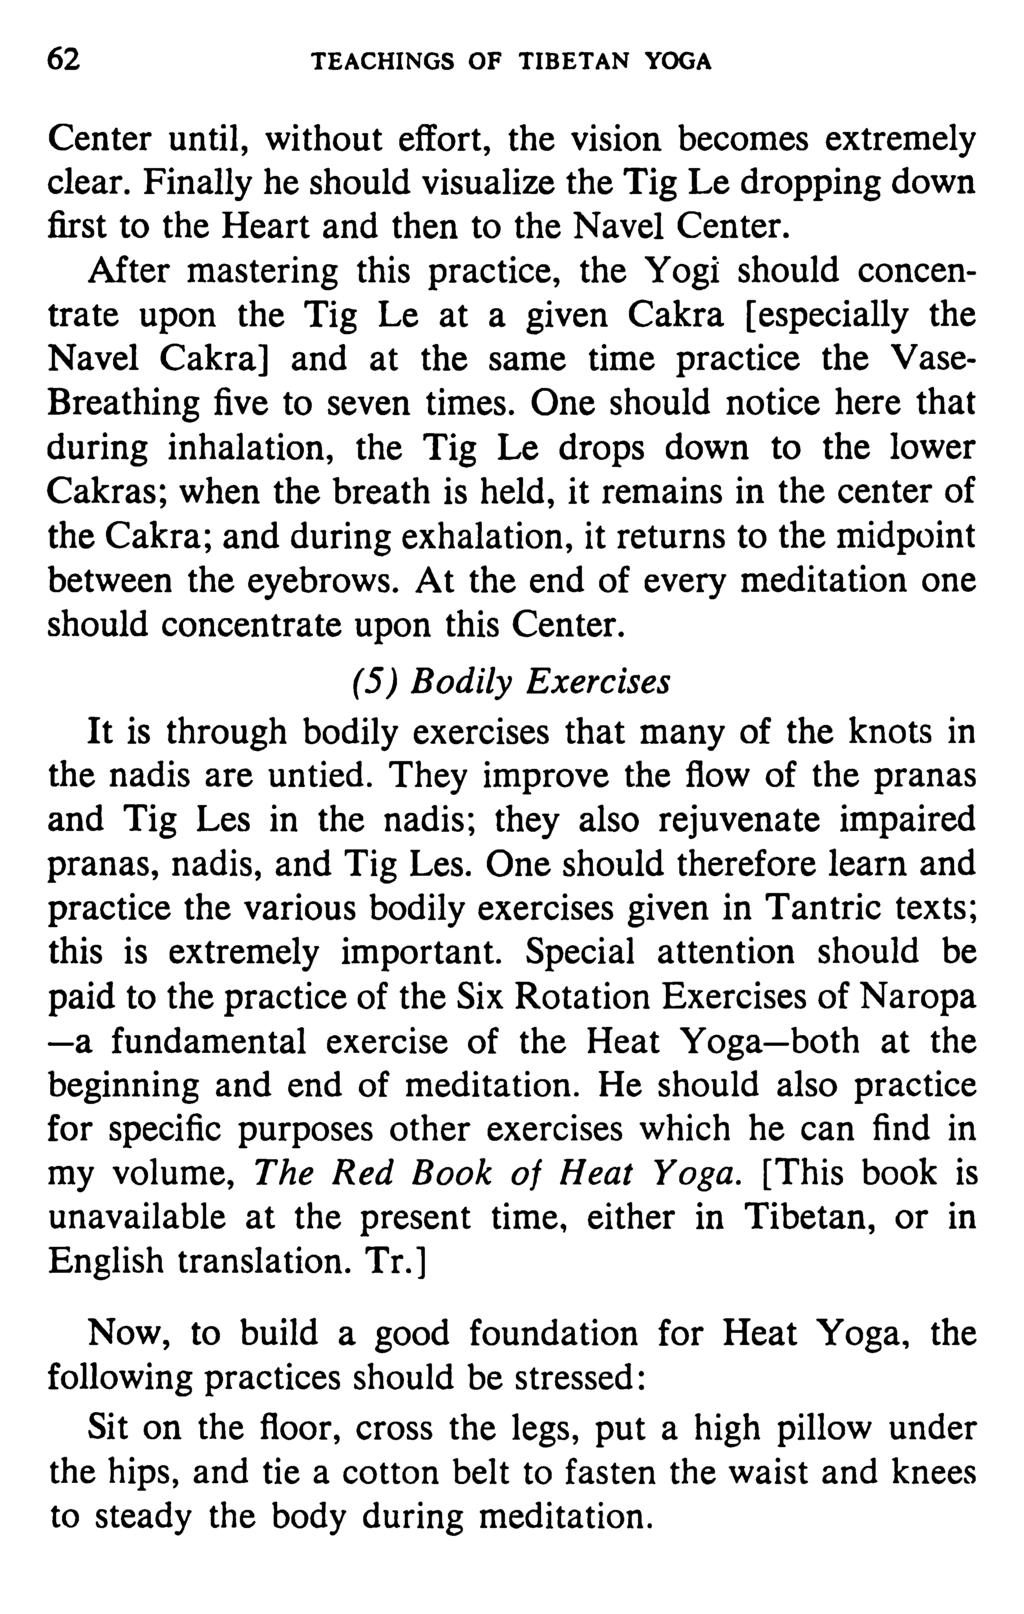 62 TEACHINGS OF TIBETAN YOGA Center until, without effort, the vision becomes extremely clear. Finally he should visualize the Tig Le dropping down first to the Heart and then to the Navel Center.